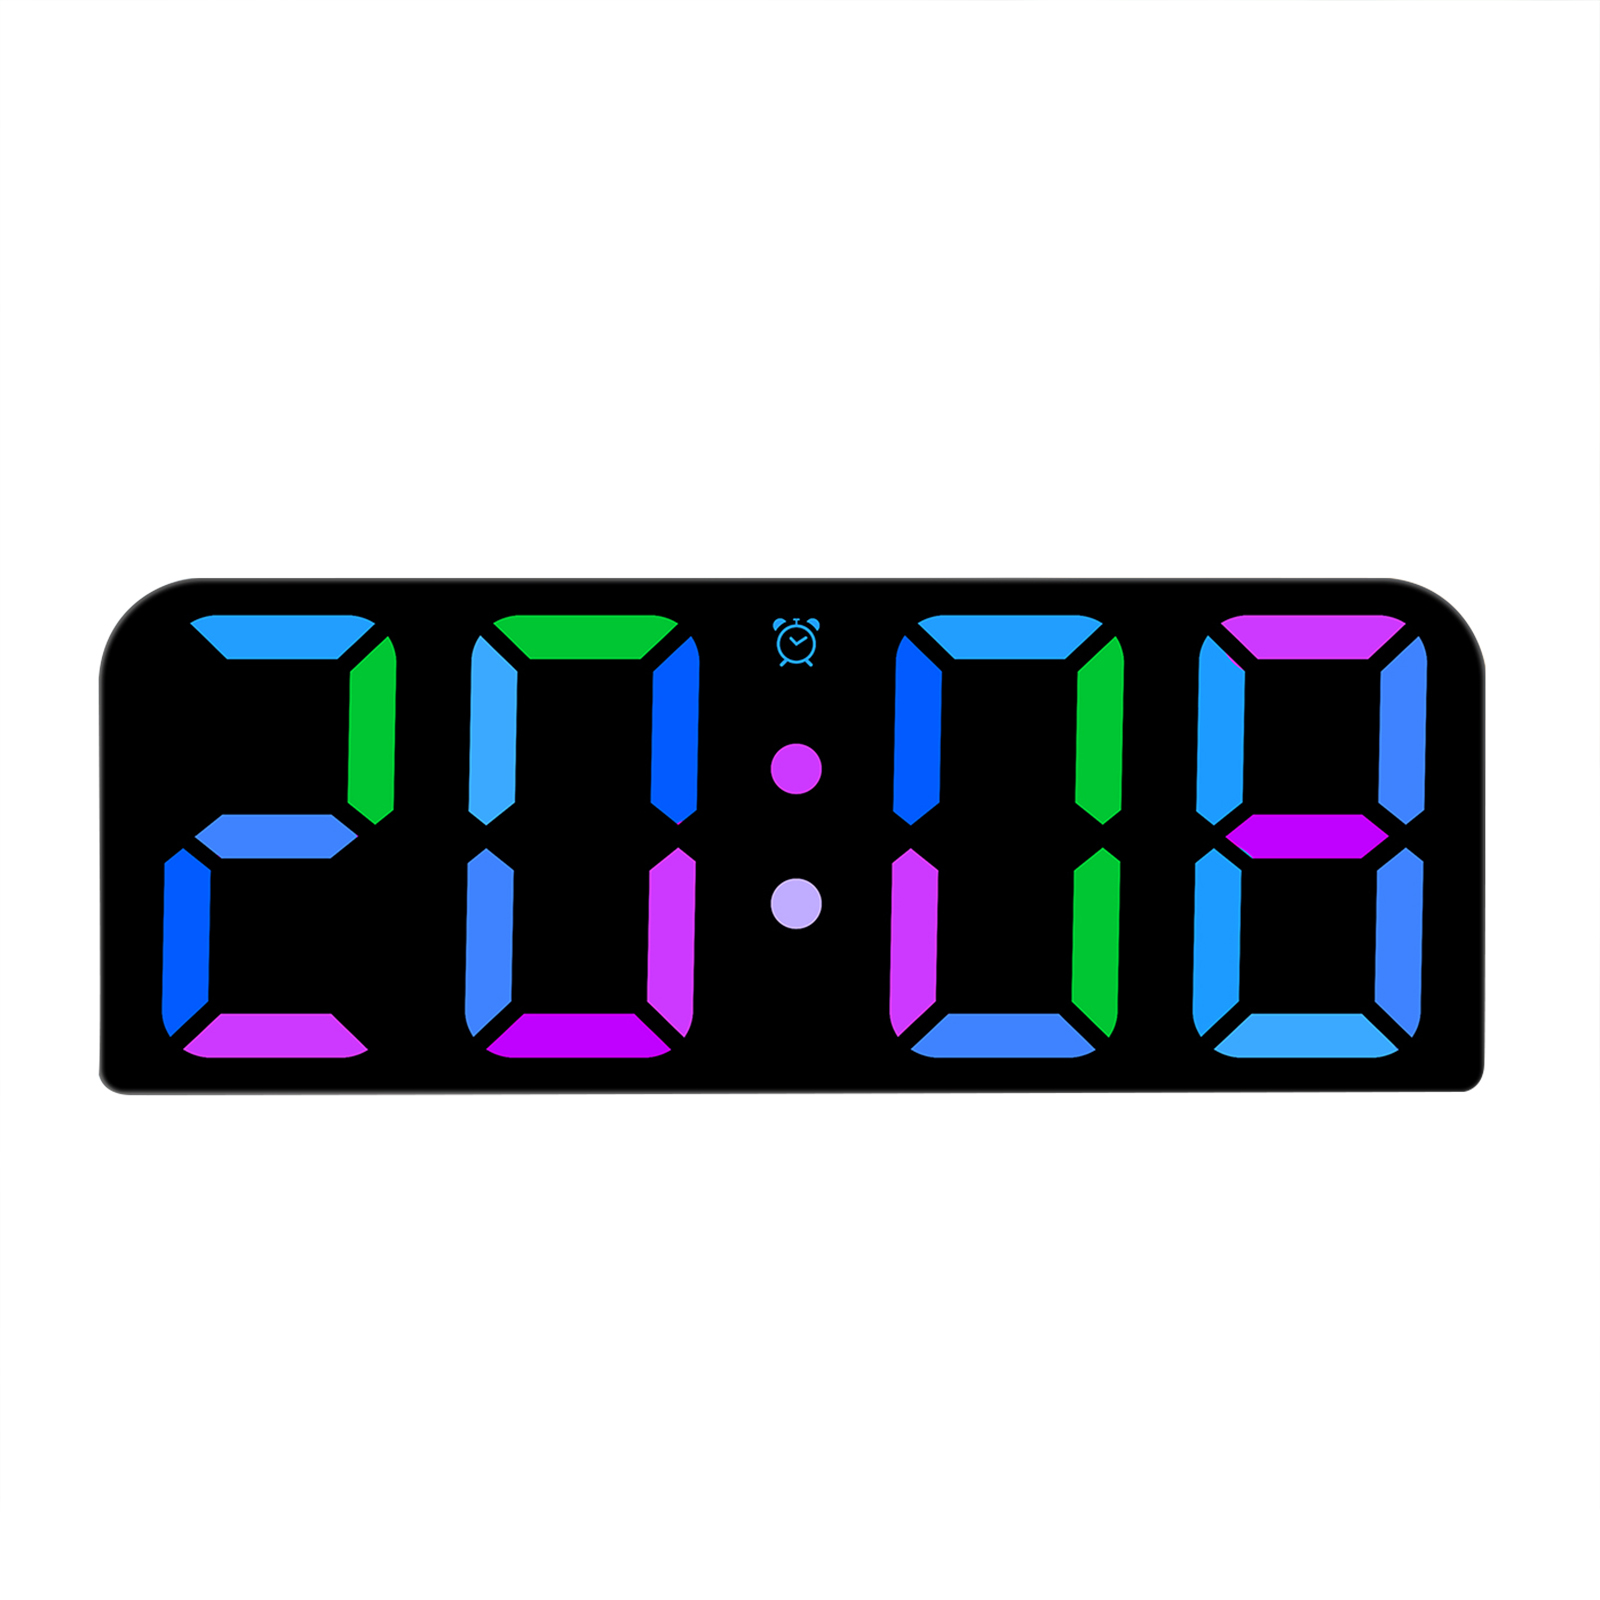 Digital Wall Clock 12/24 Hour Format With Automatic Night Mode LED Big Digits Clock For Farmhouse Kitchen Office